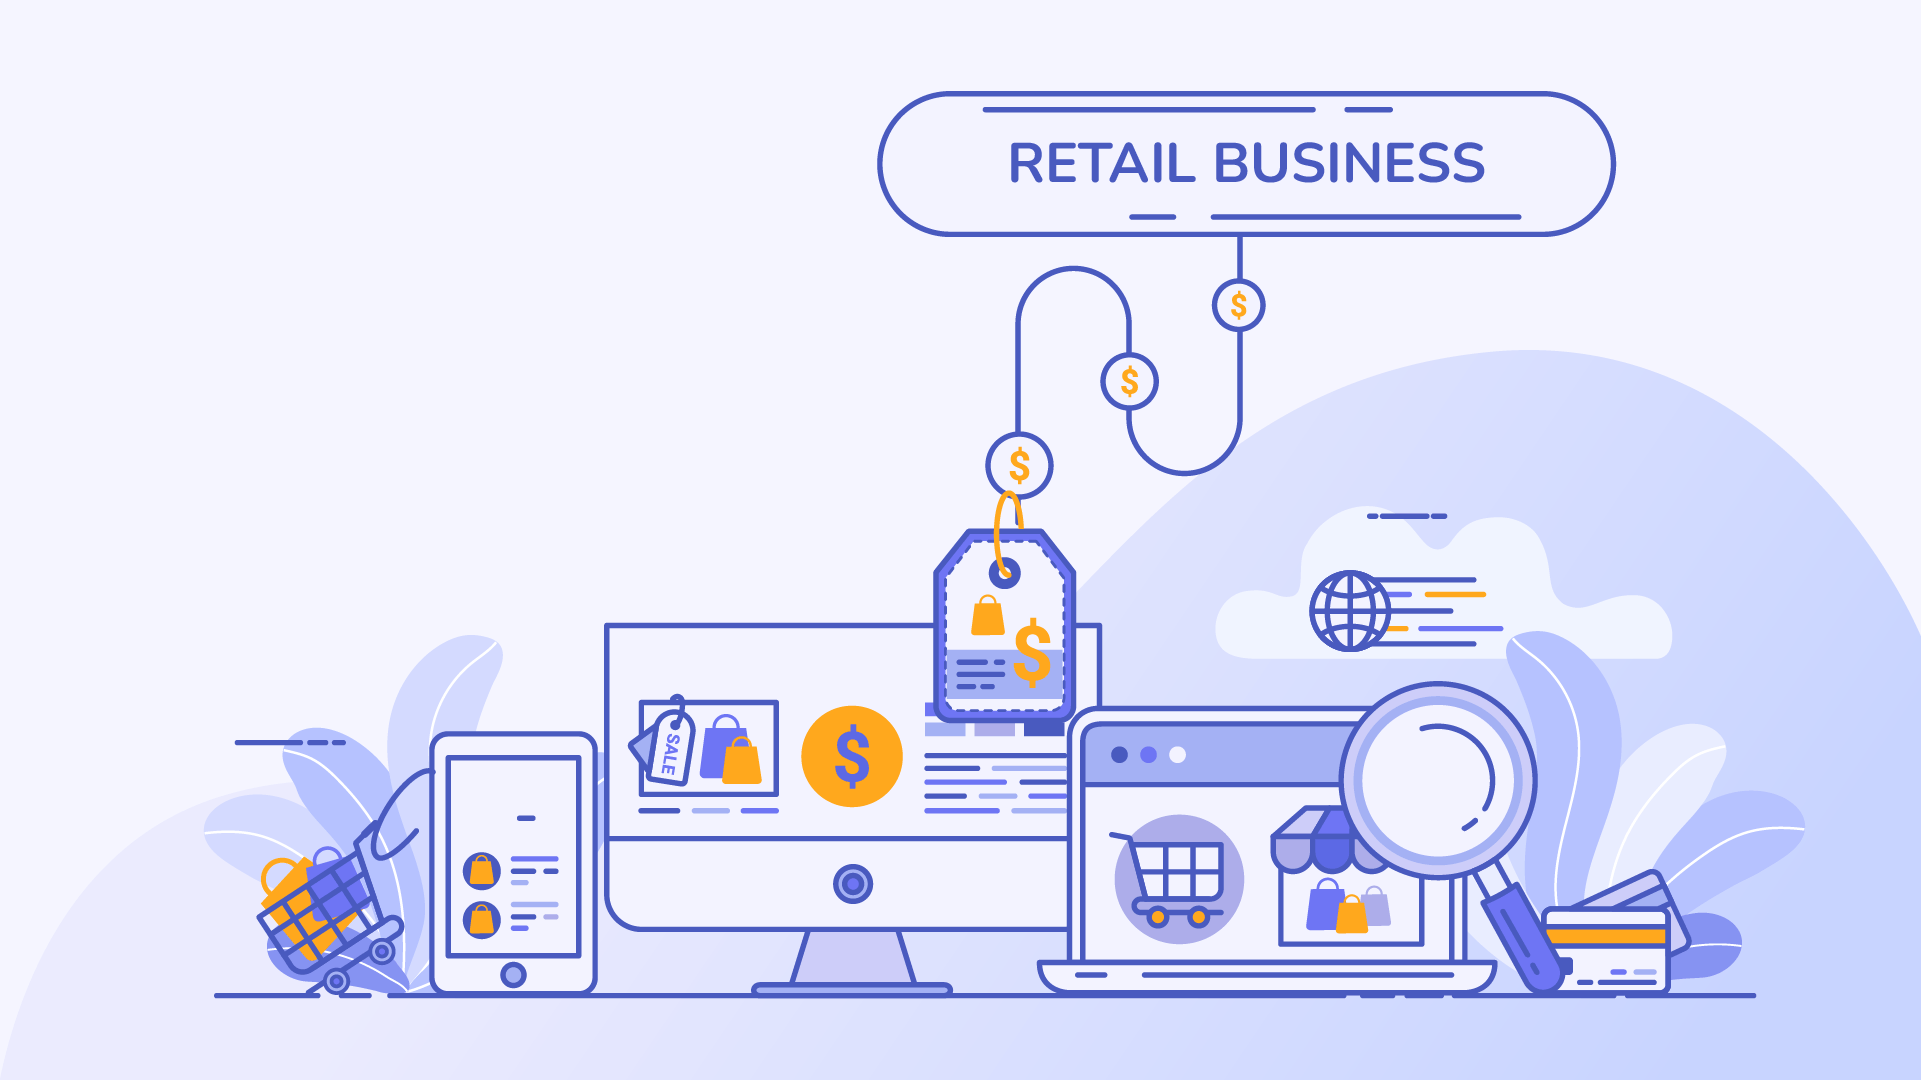 Add Rental Products to Your Retail Business